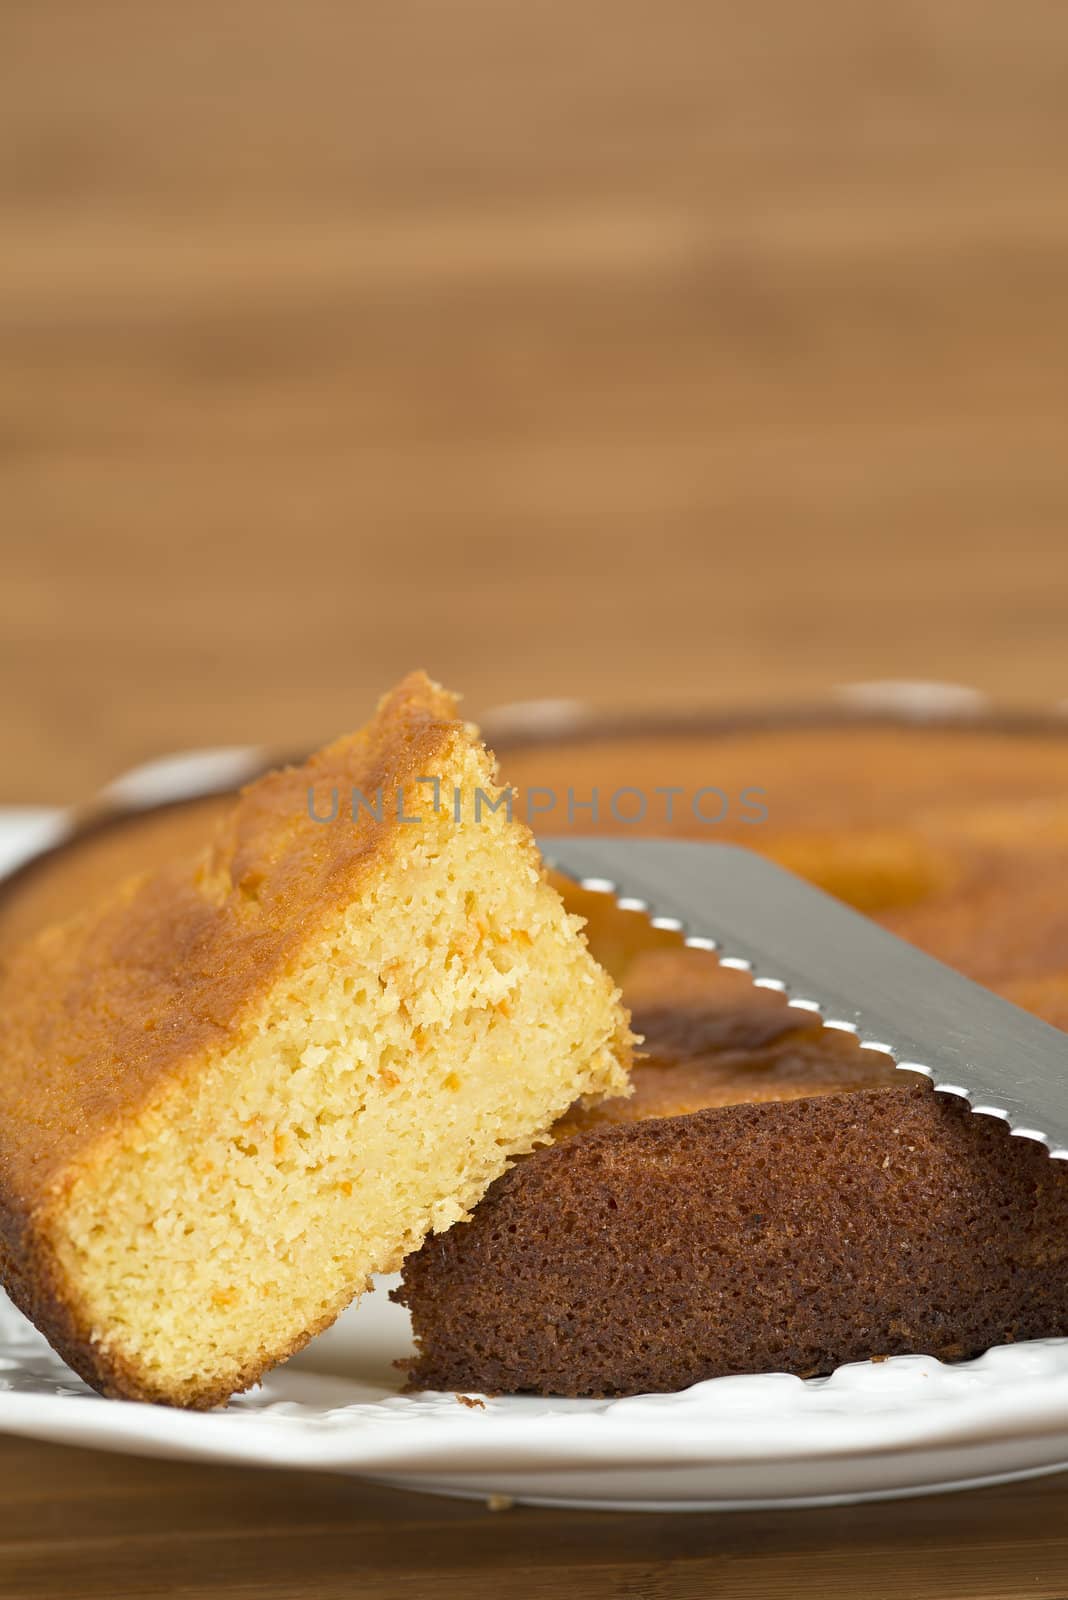 A cut homemade cake showing its texture on a wooden surface.